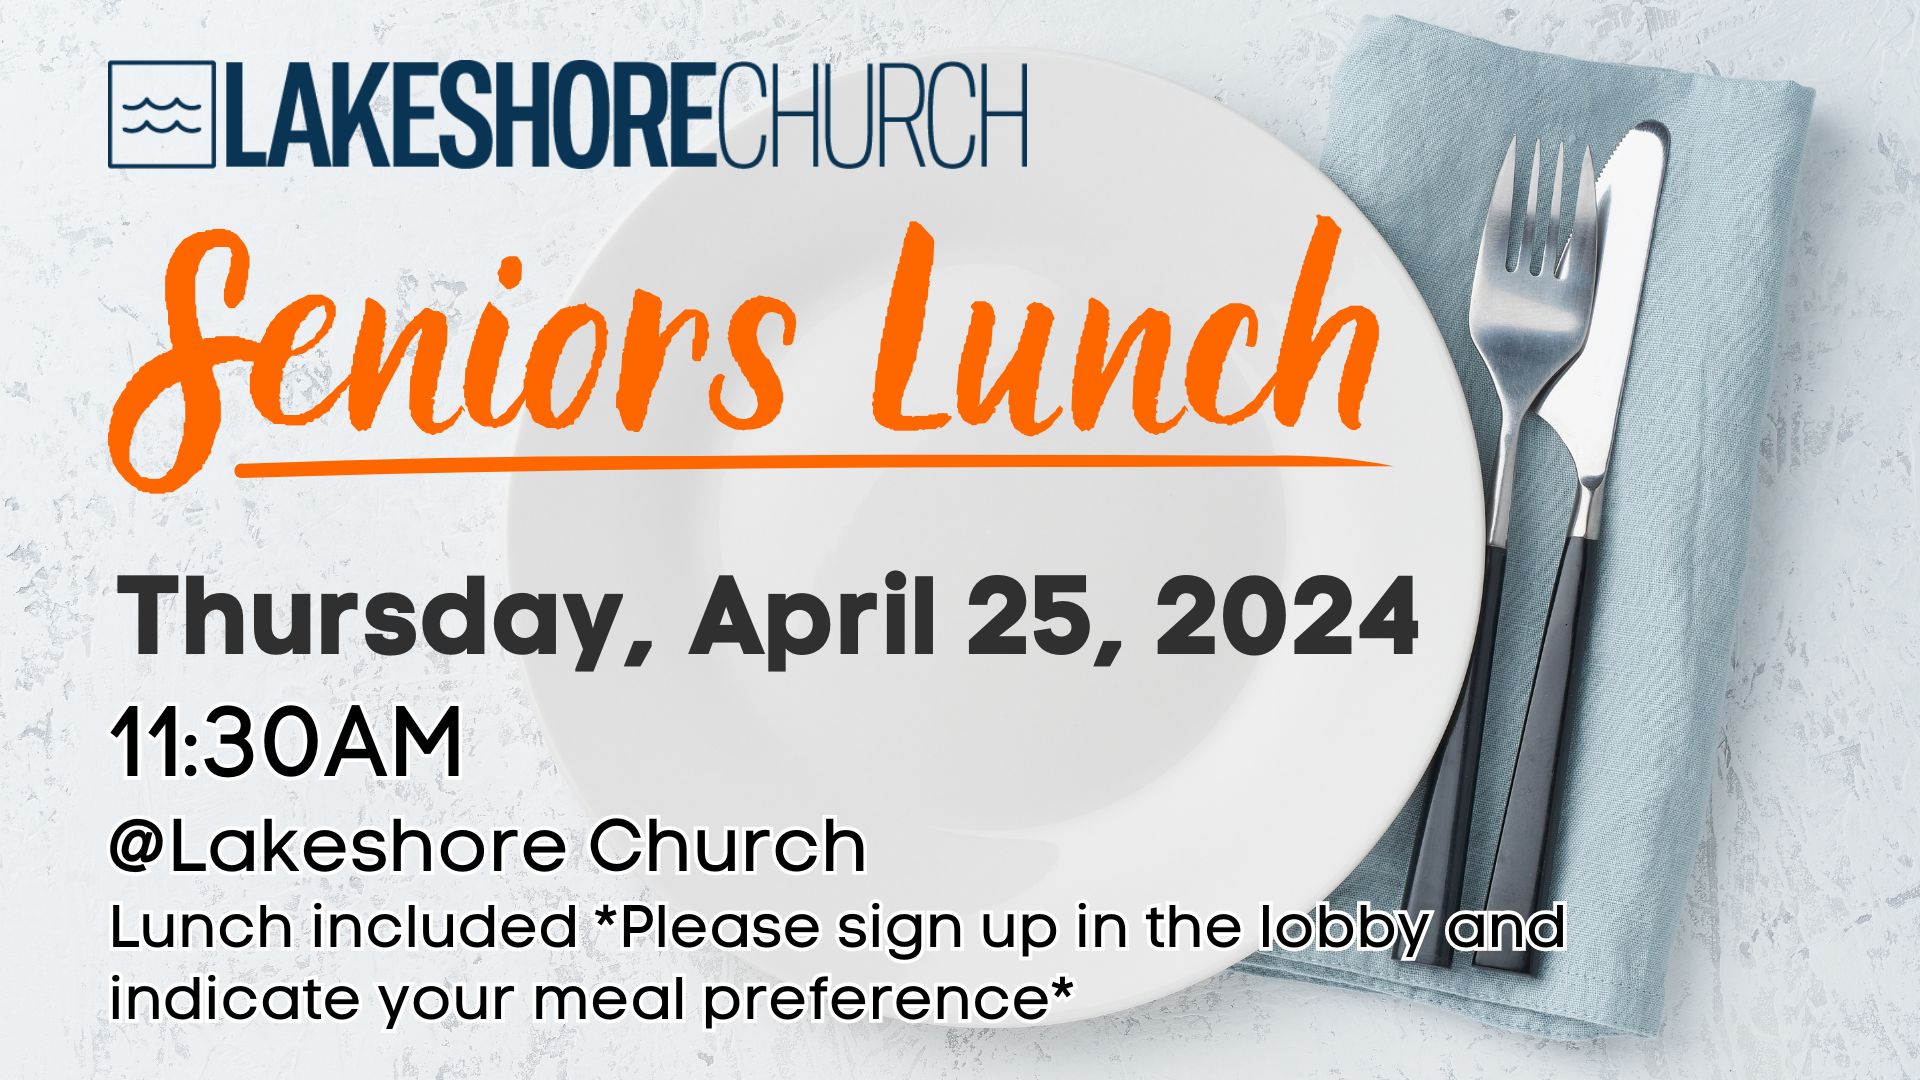 Featured image for “Senior’s Luncheon”